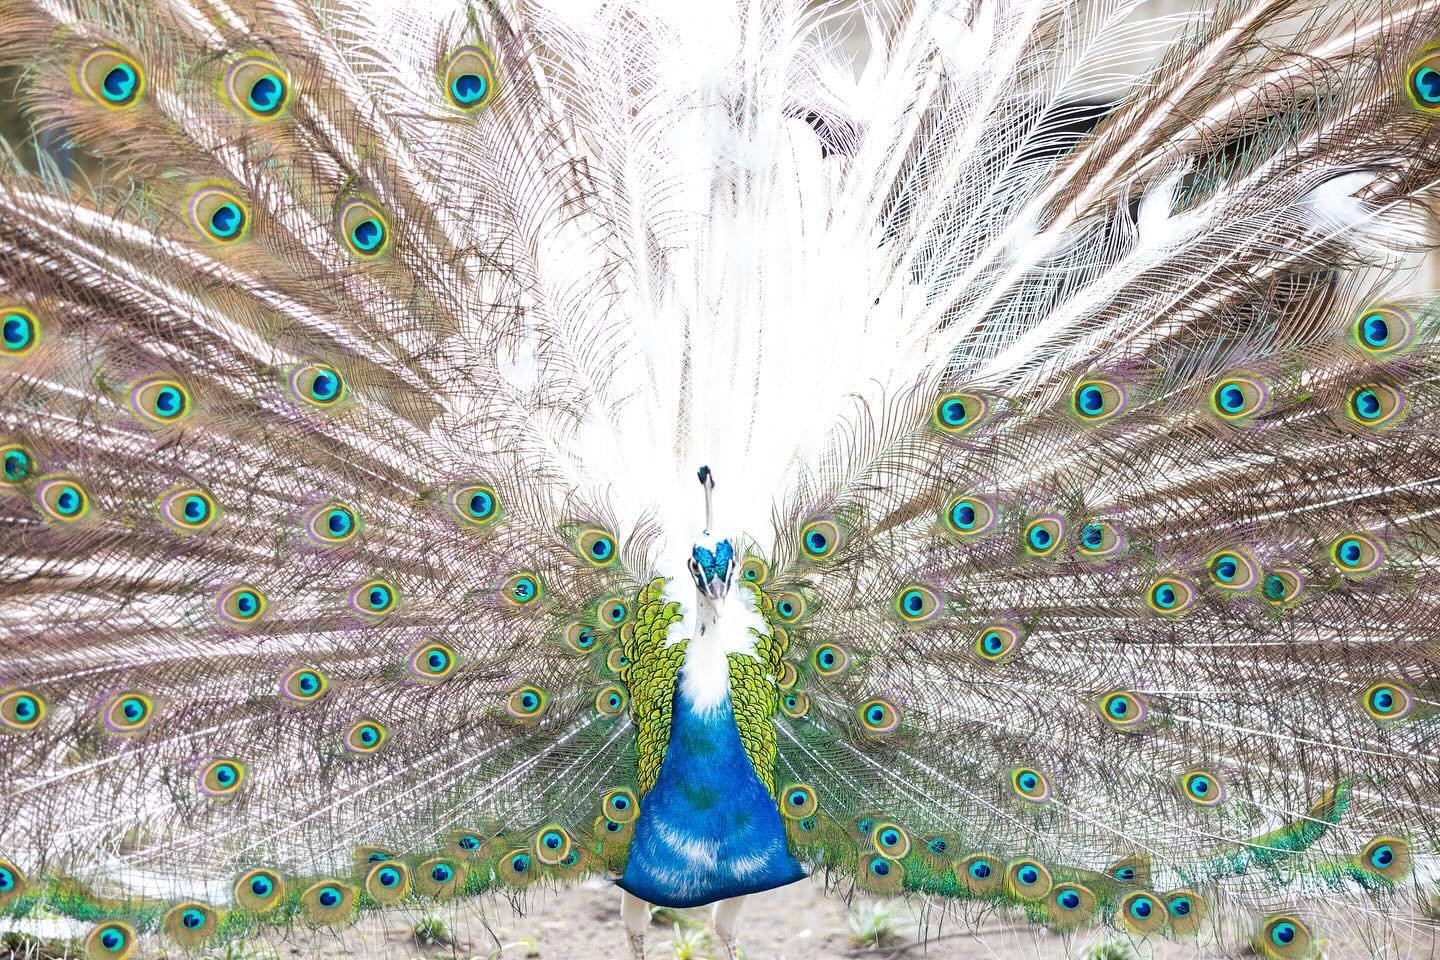 &ldquo;Be like a peacock and dance with all of your beauty.&rdquo;
-@debasishmridha1

#elketeichmannphotography #elketeichmannphoto #naturephotography #animalphotography #peacock #peacockfeathers #lisbon #photography